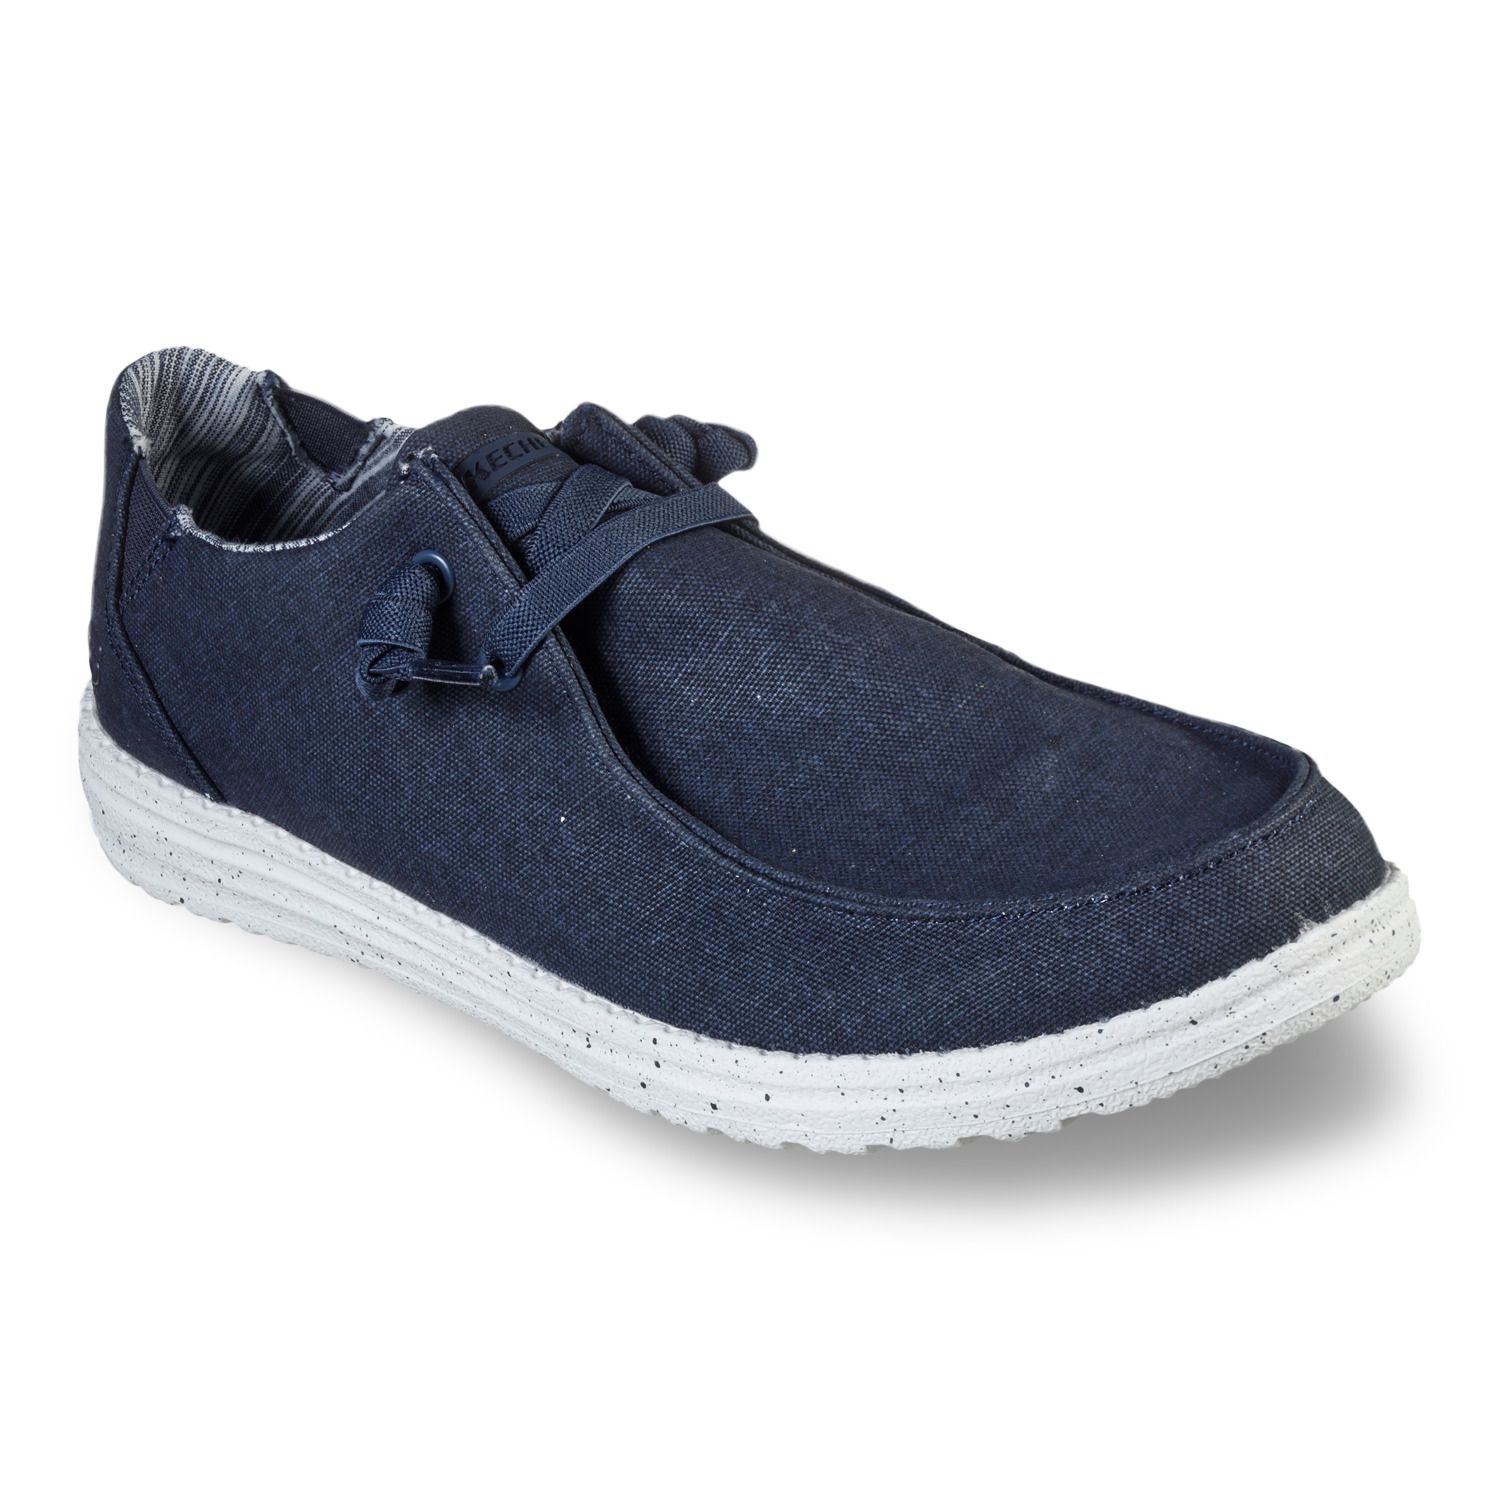 skechers mens shoes clearance